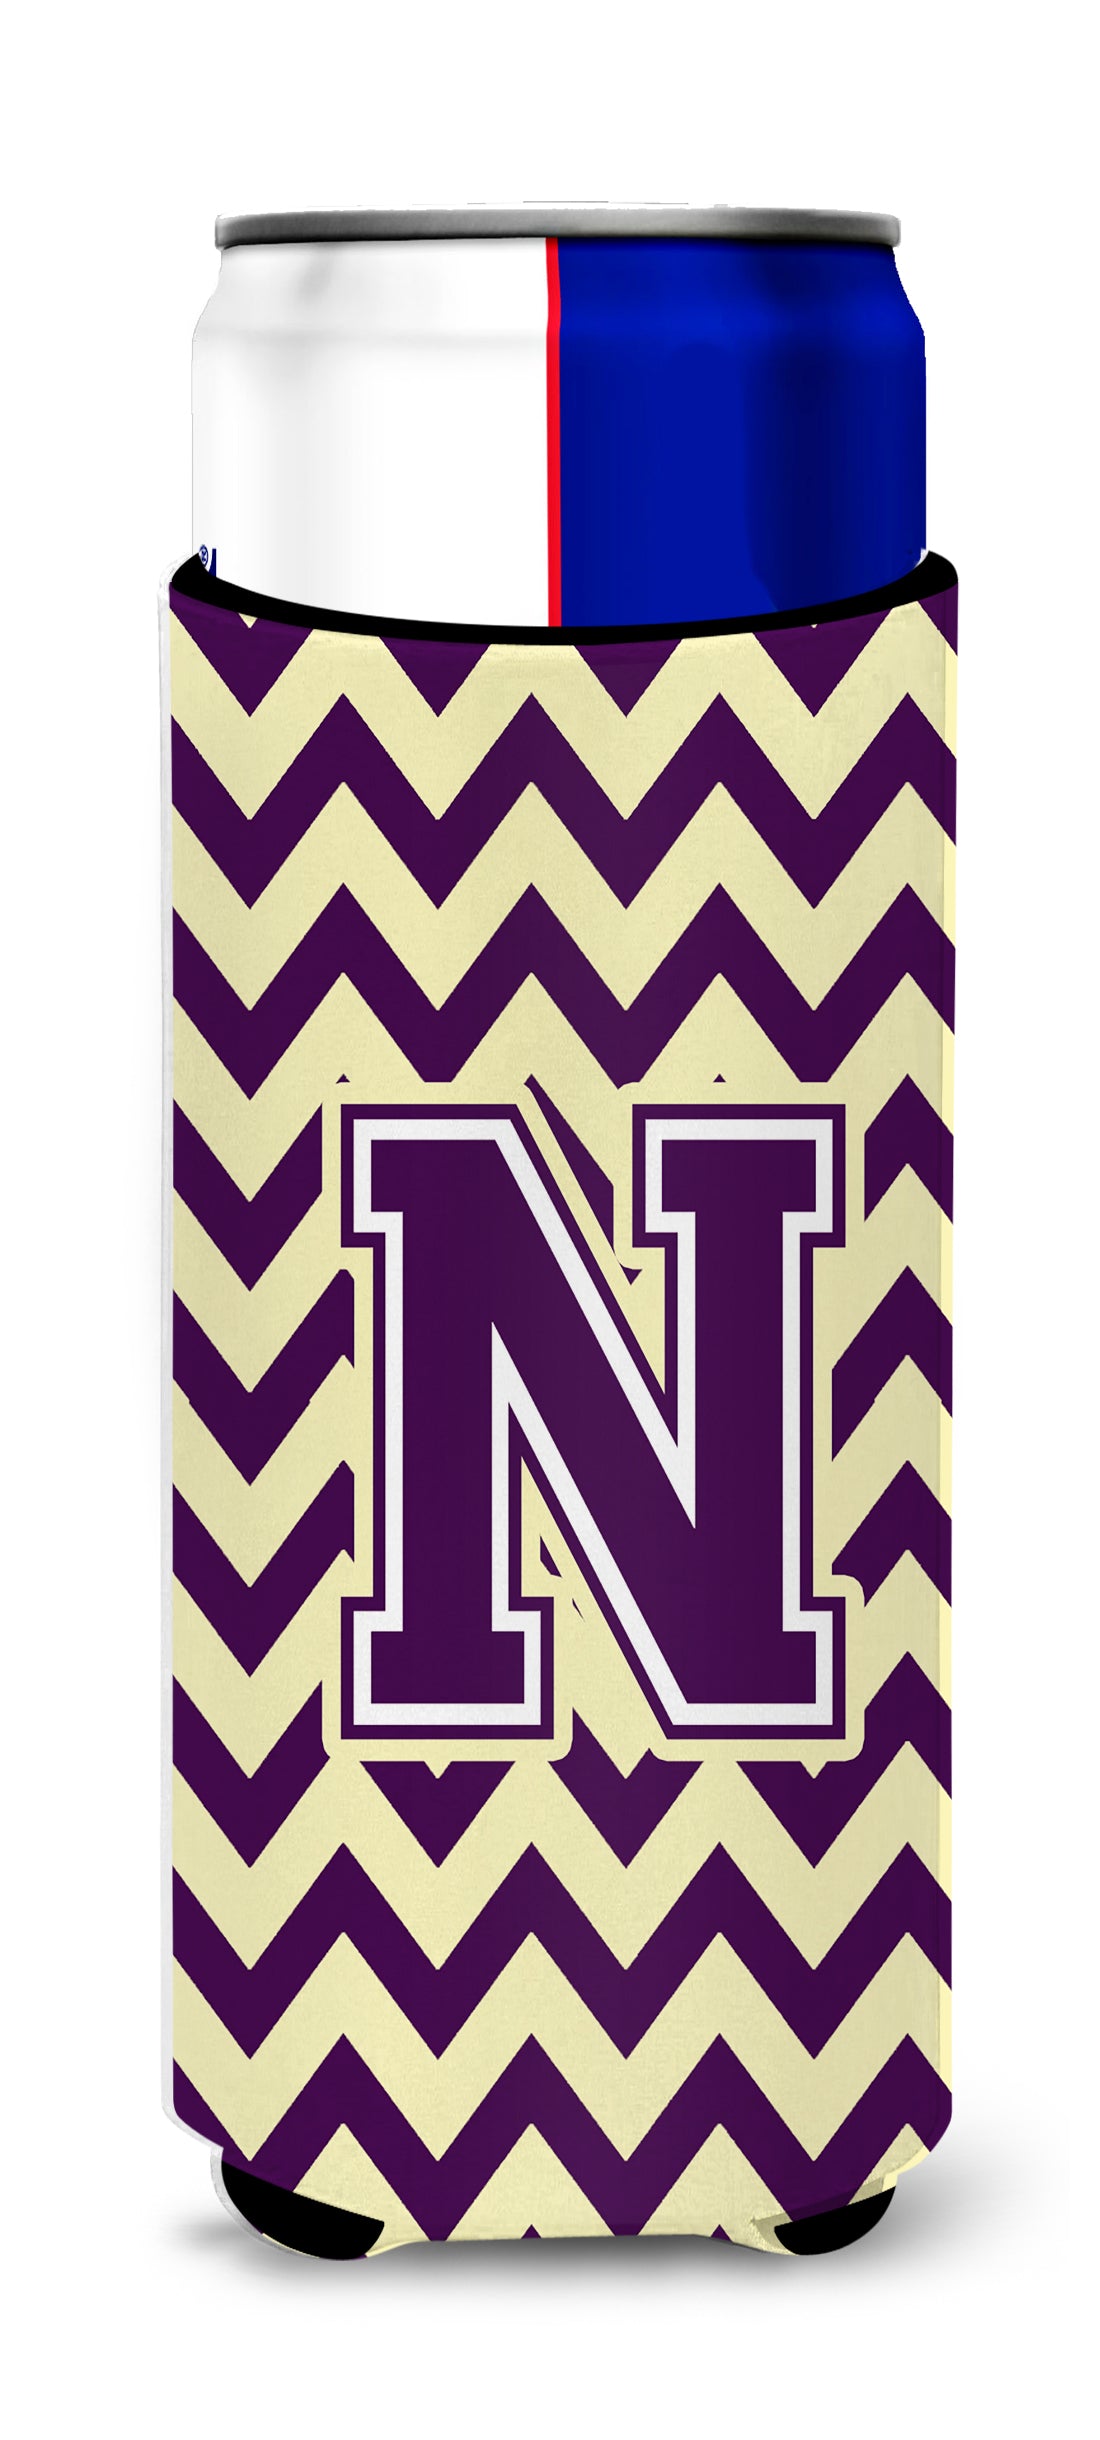 Letter N Chevron Purple and Gold Ultra Beverage Insulators for slim cans CJ1058-NMUK